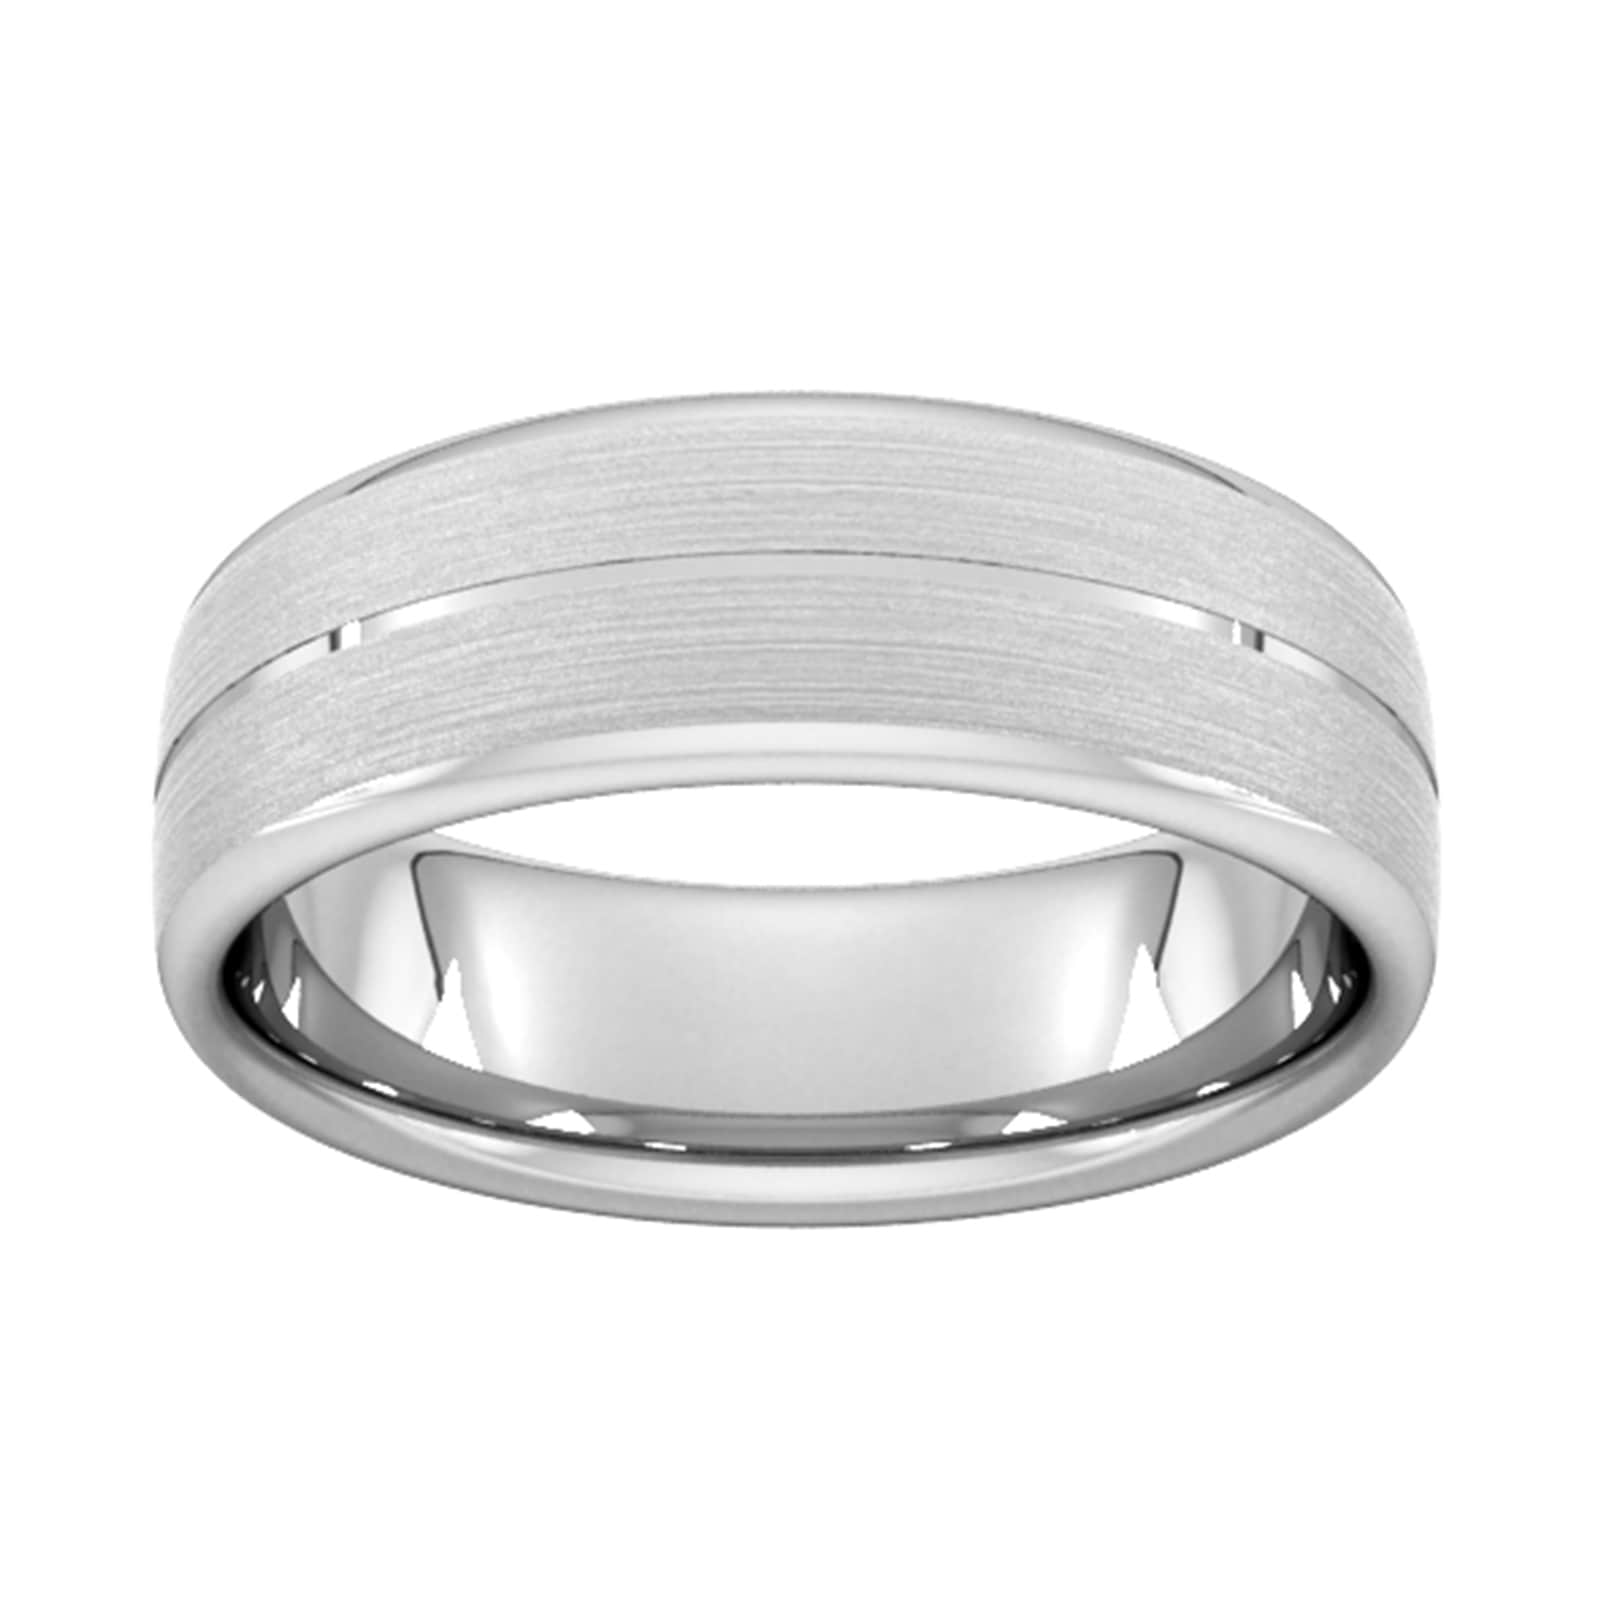 7mm Slight Court Standard Centre Groove With Chamfered Edge Wedding Ring In Platinum - Ring Size M